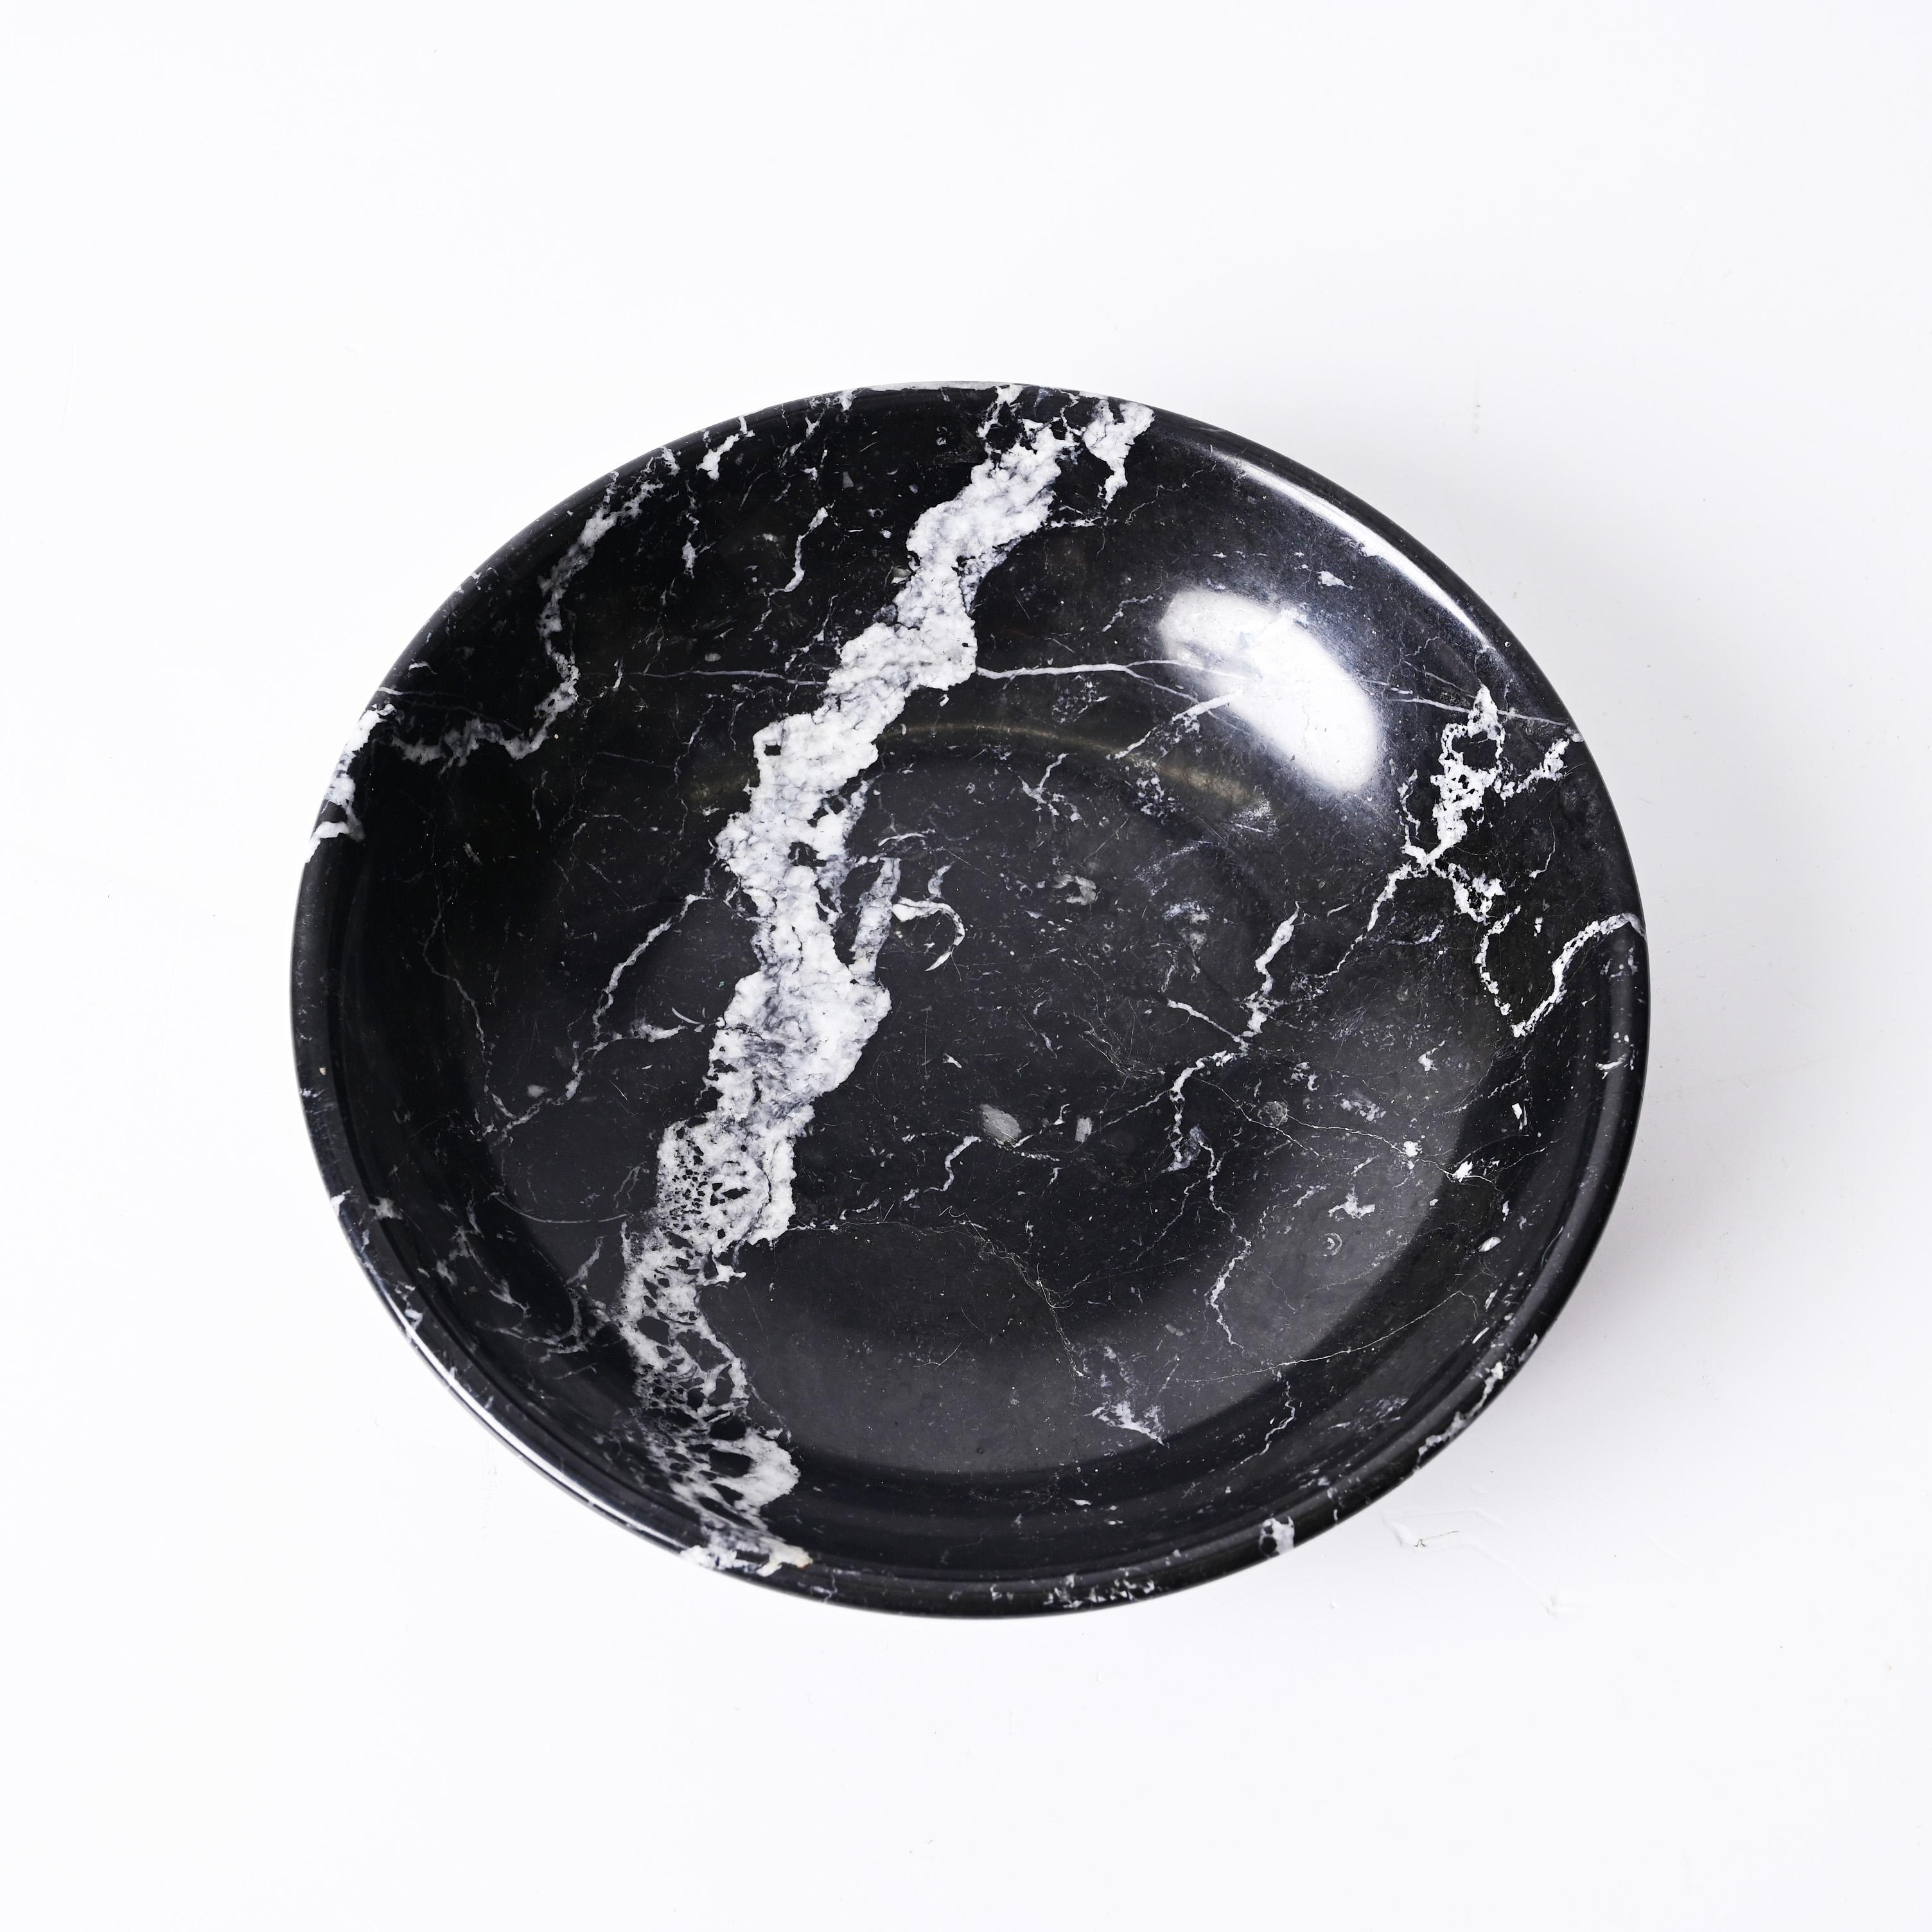 Midcentury Black Marble with White Grains Round Italian Decorative Bowl, 1950s For Sale 4